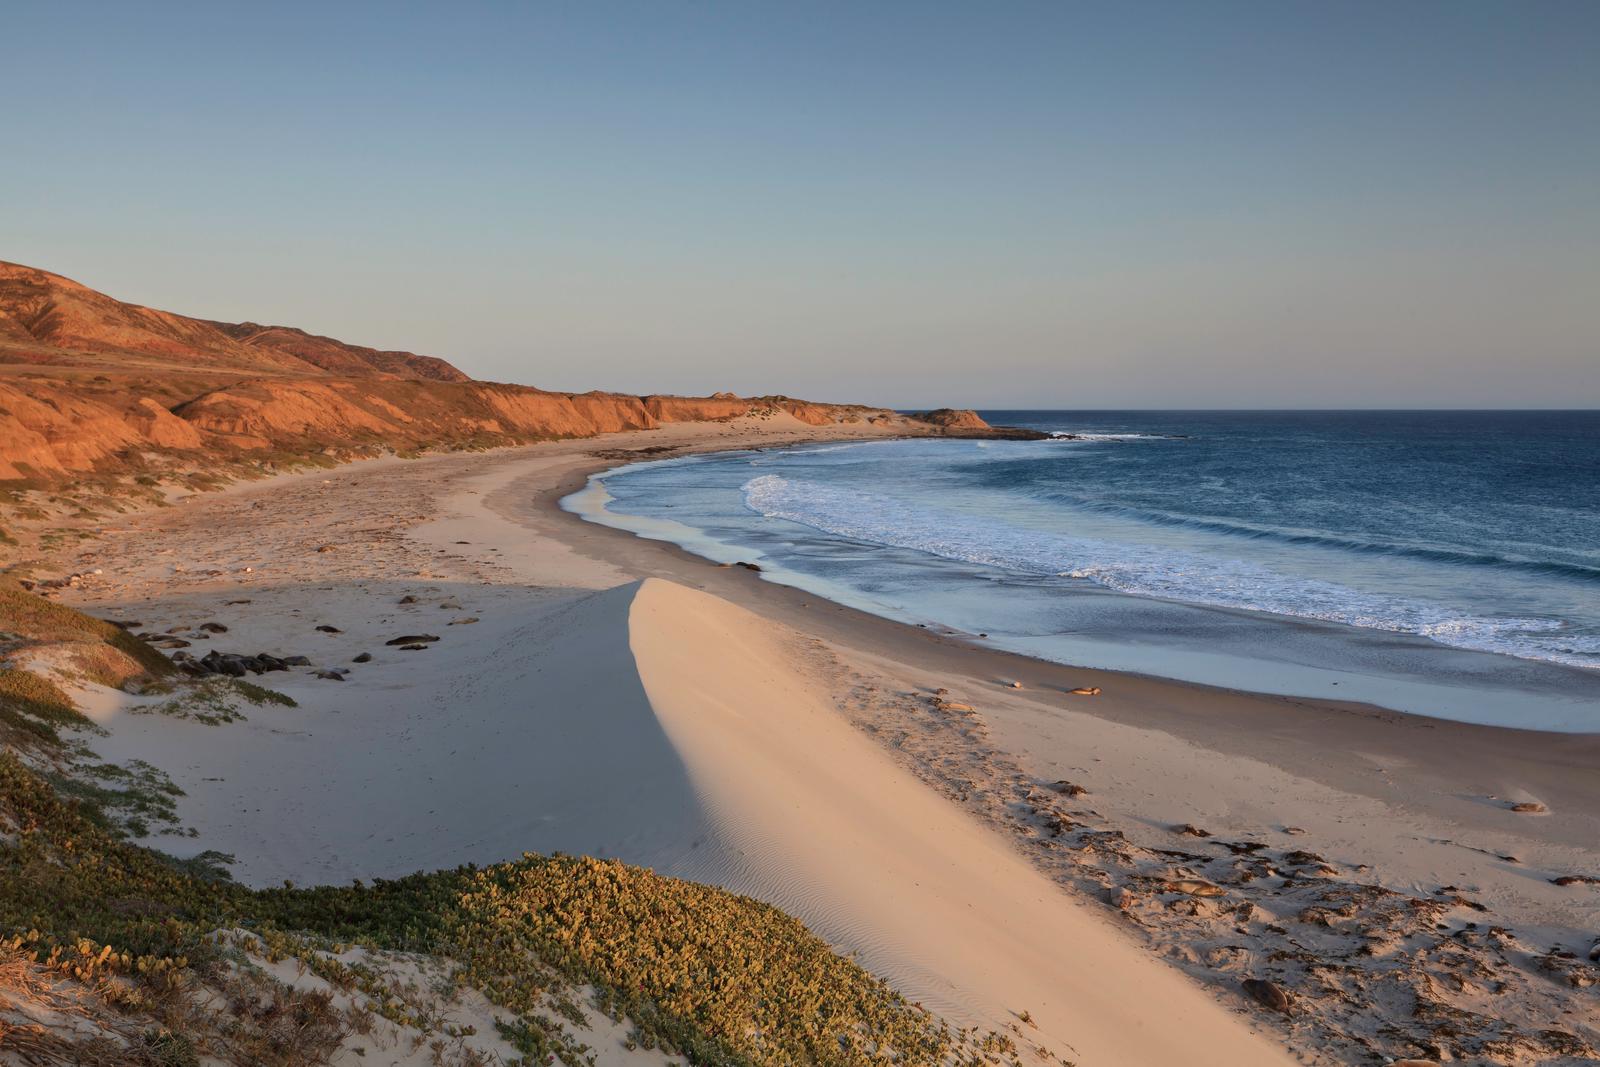 Sandy beach with dunes, ocean and small waves and steep coastal bluffs covered in grass.  